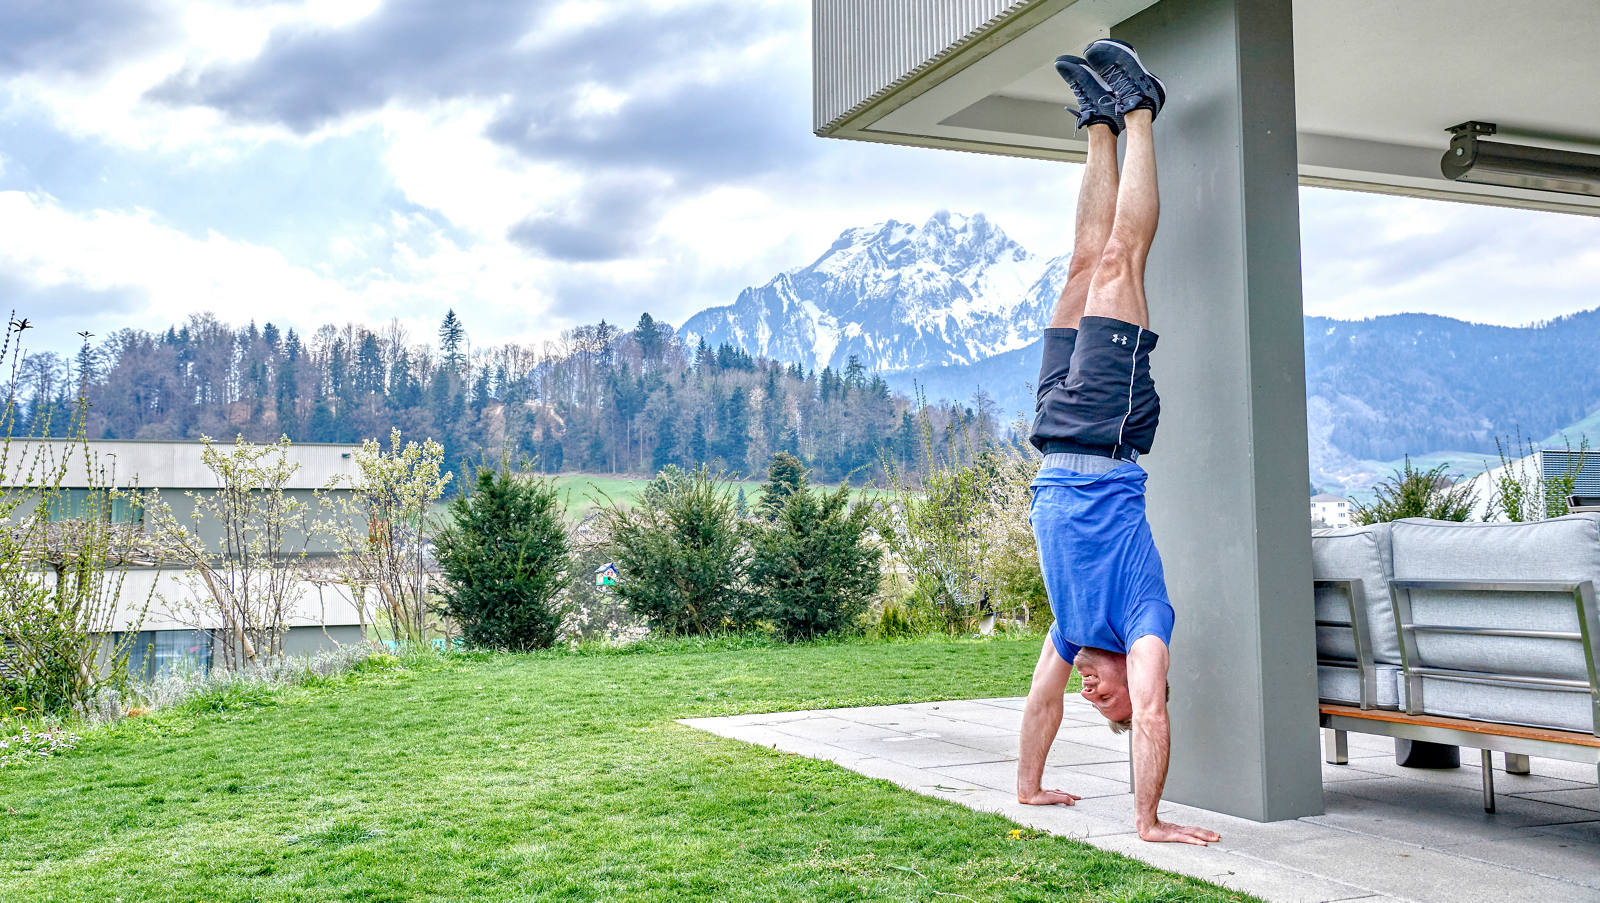 Learn to do the handstand: with momentum against the wall